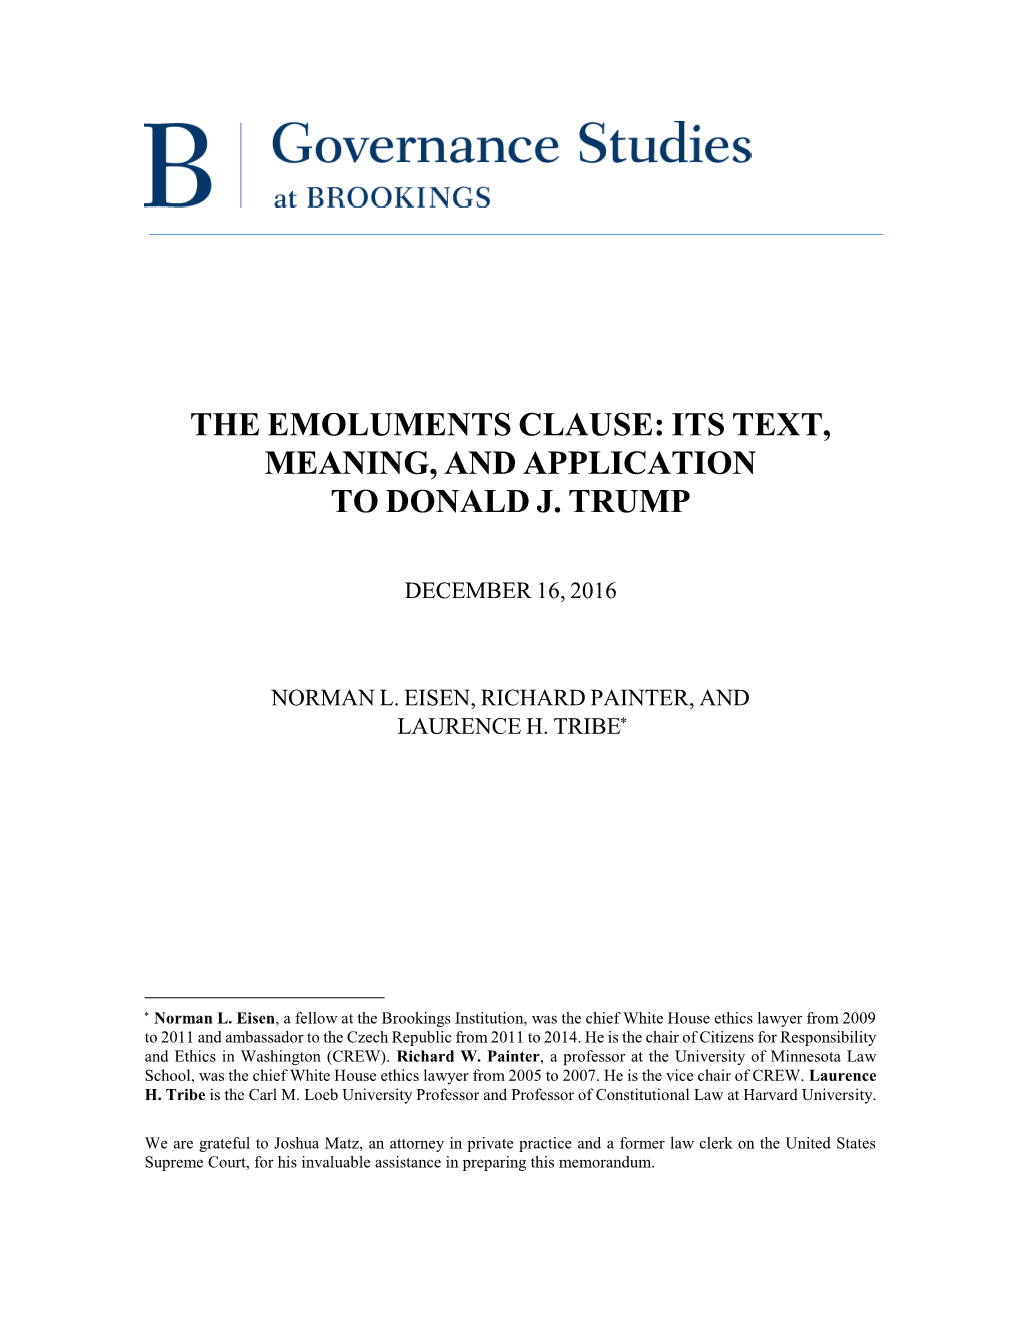 The Emoluments Clause: Its Text, Meaning, and Application to Donald J. Trump